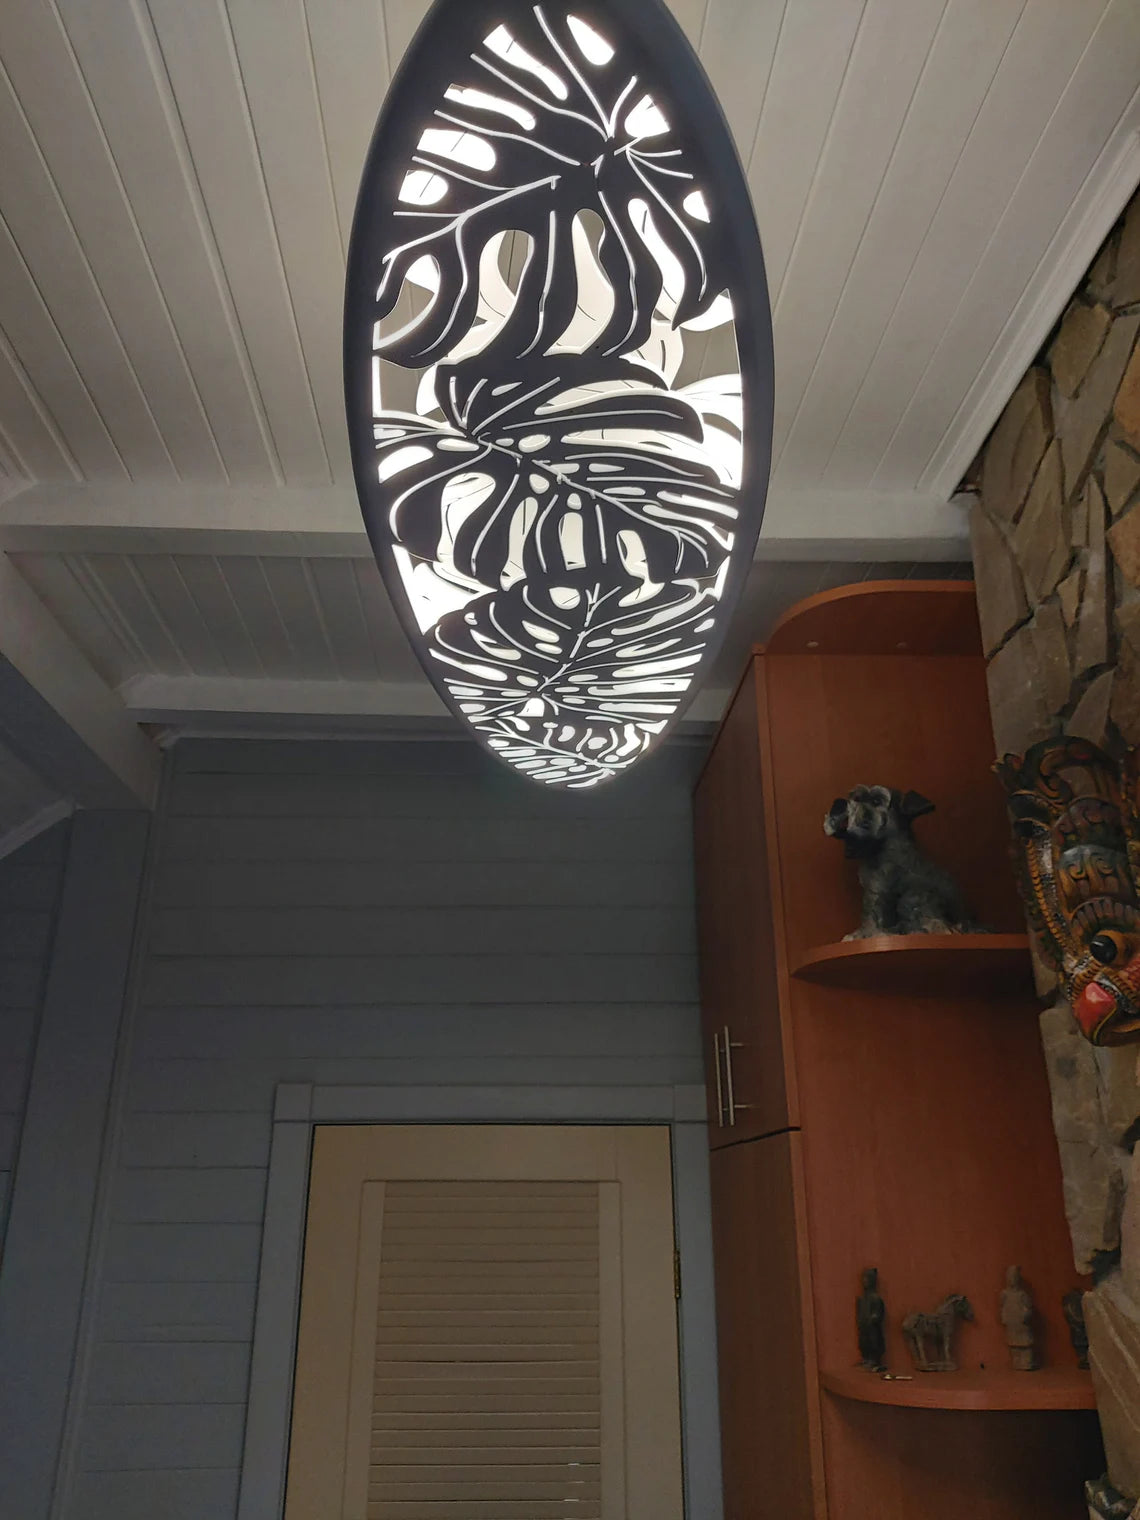 30 inch Surfboard Shaped Ceiling Chandelier with Monstera Leaf Carving